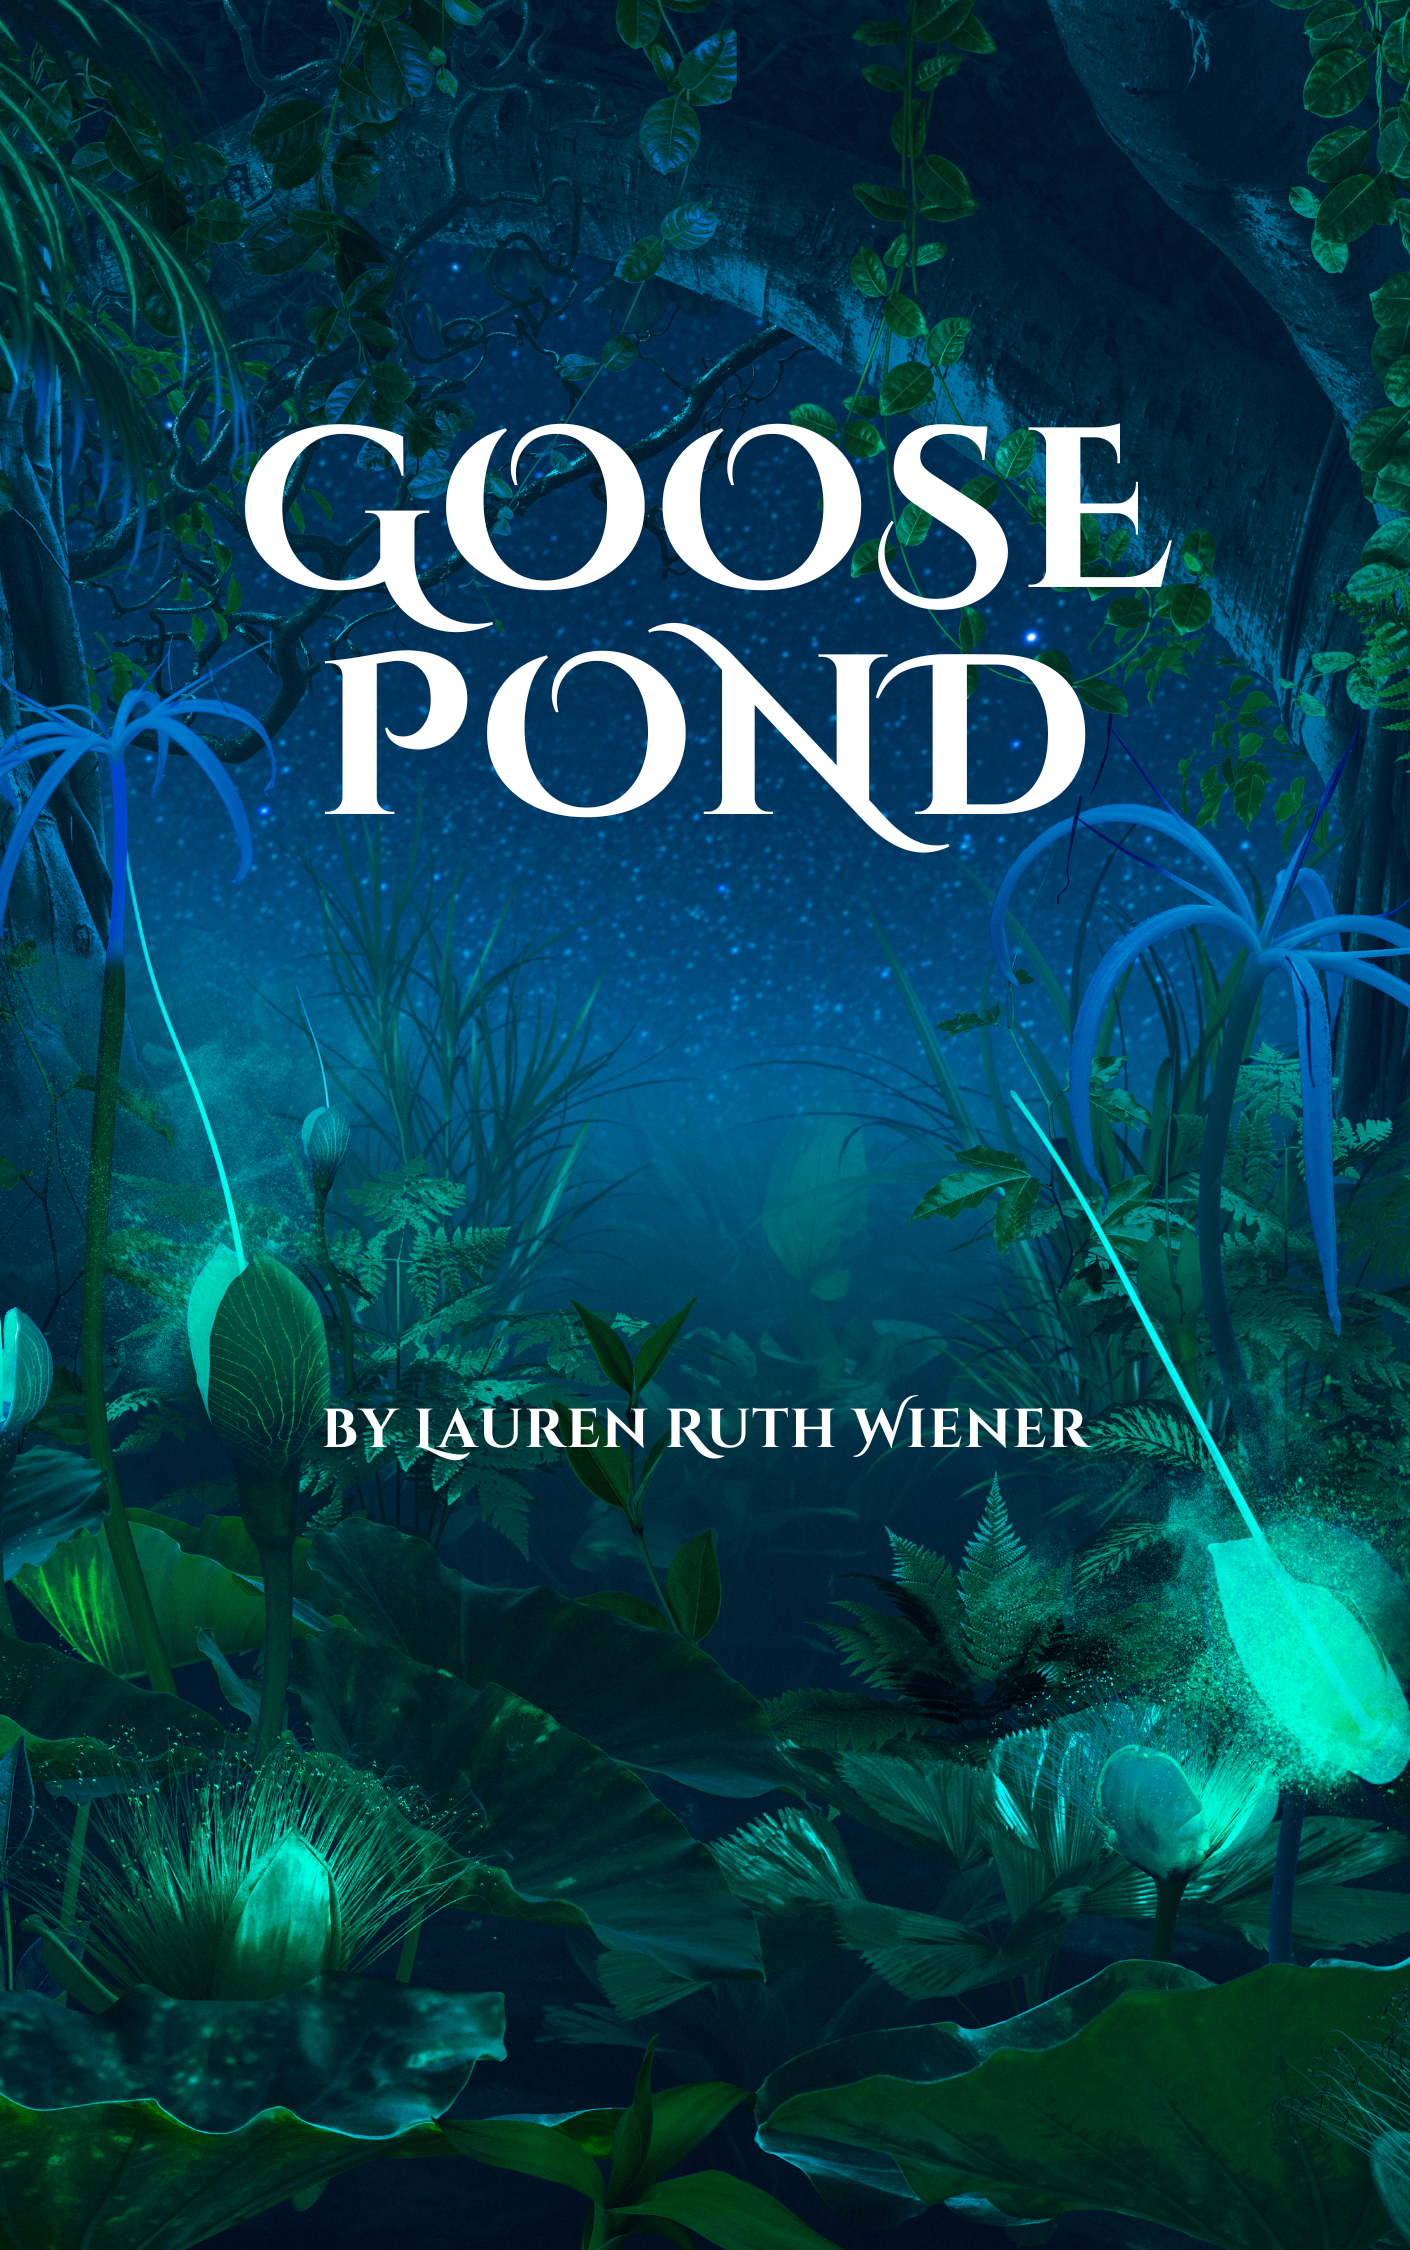 Image of Goose Pond book cover